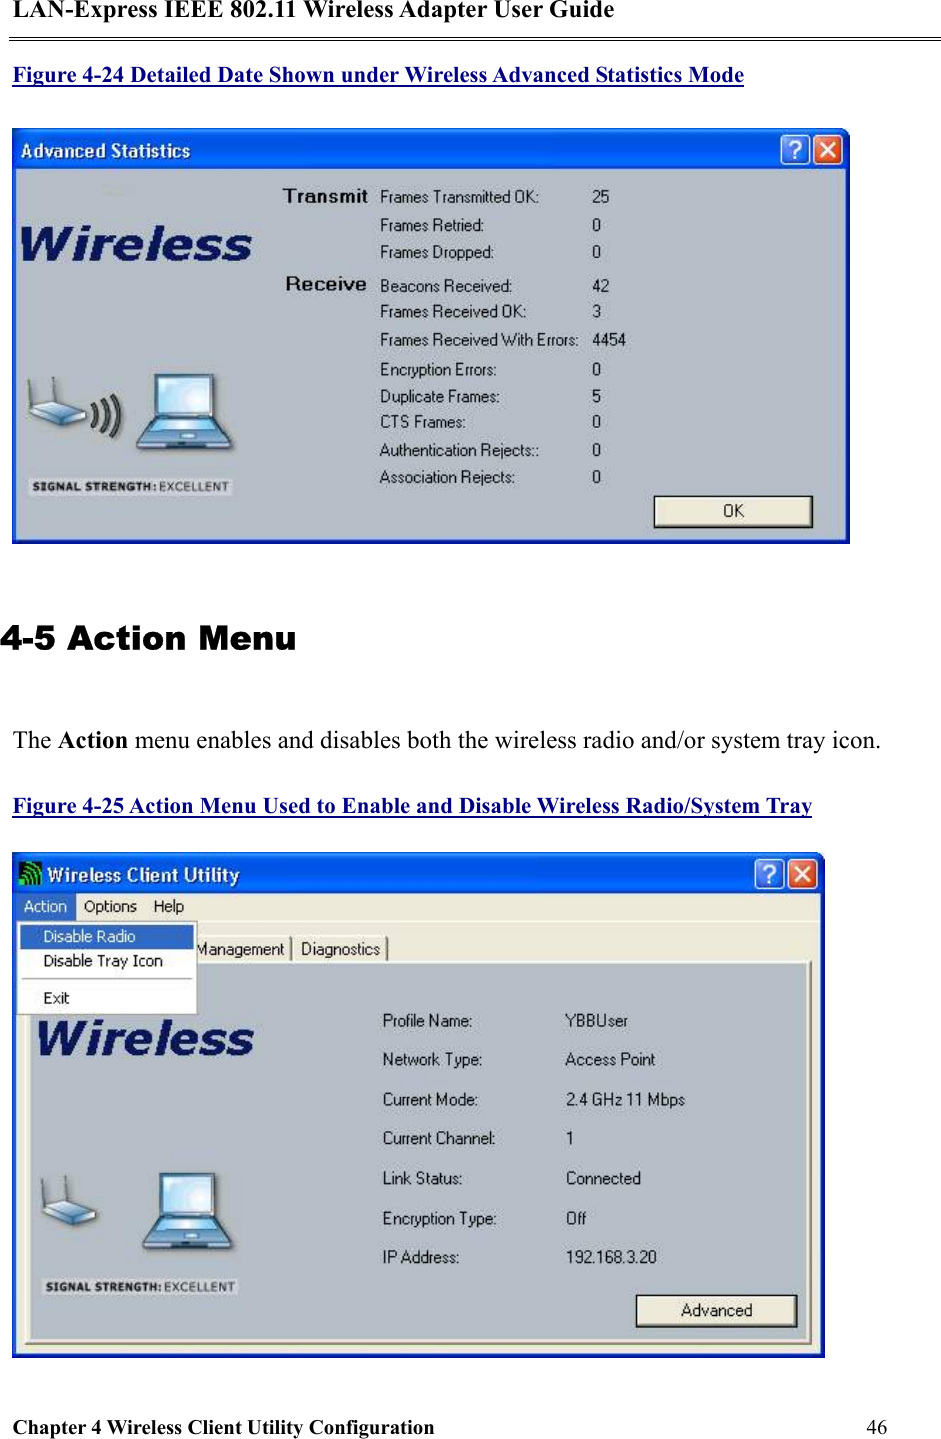 LAN-Express IEEE 802.11 Wireless Adapter User Guide Chapter 4 Wireless Client Utility Configuration   46  Figure 4-24 Detailed Date Shown under Wireless Advanced Statistics Mode  4-5 Action Menu The Action menu enables and disables both the wireless radio and/or system tray icon. Figure 4-25 Action Menu Used to Enable and Disable Wireless Radio/System Tray  